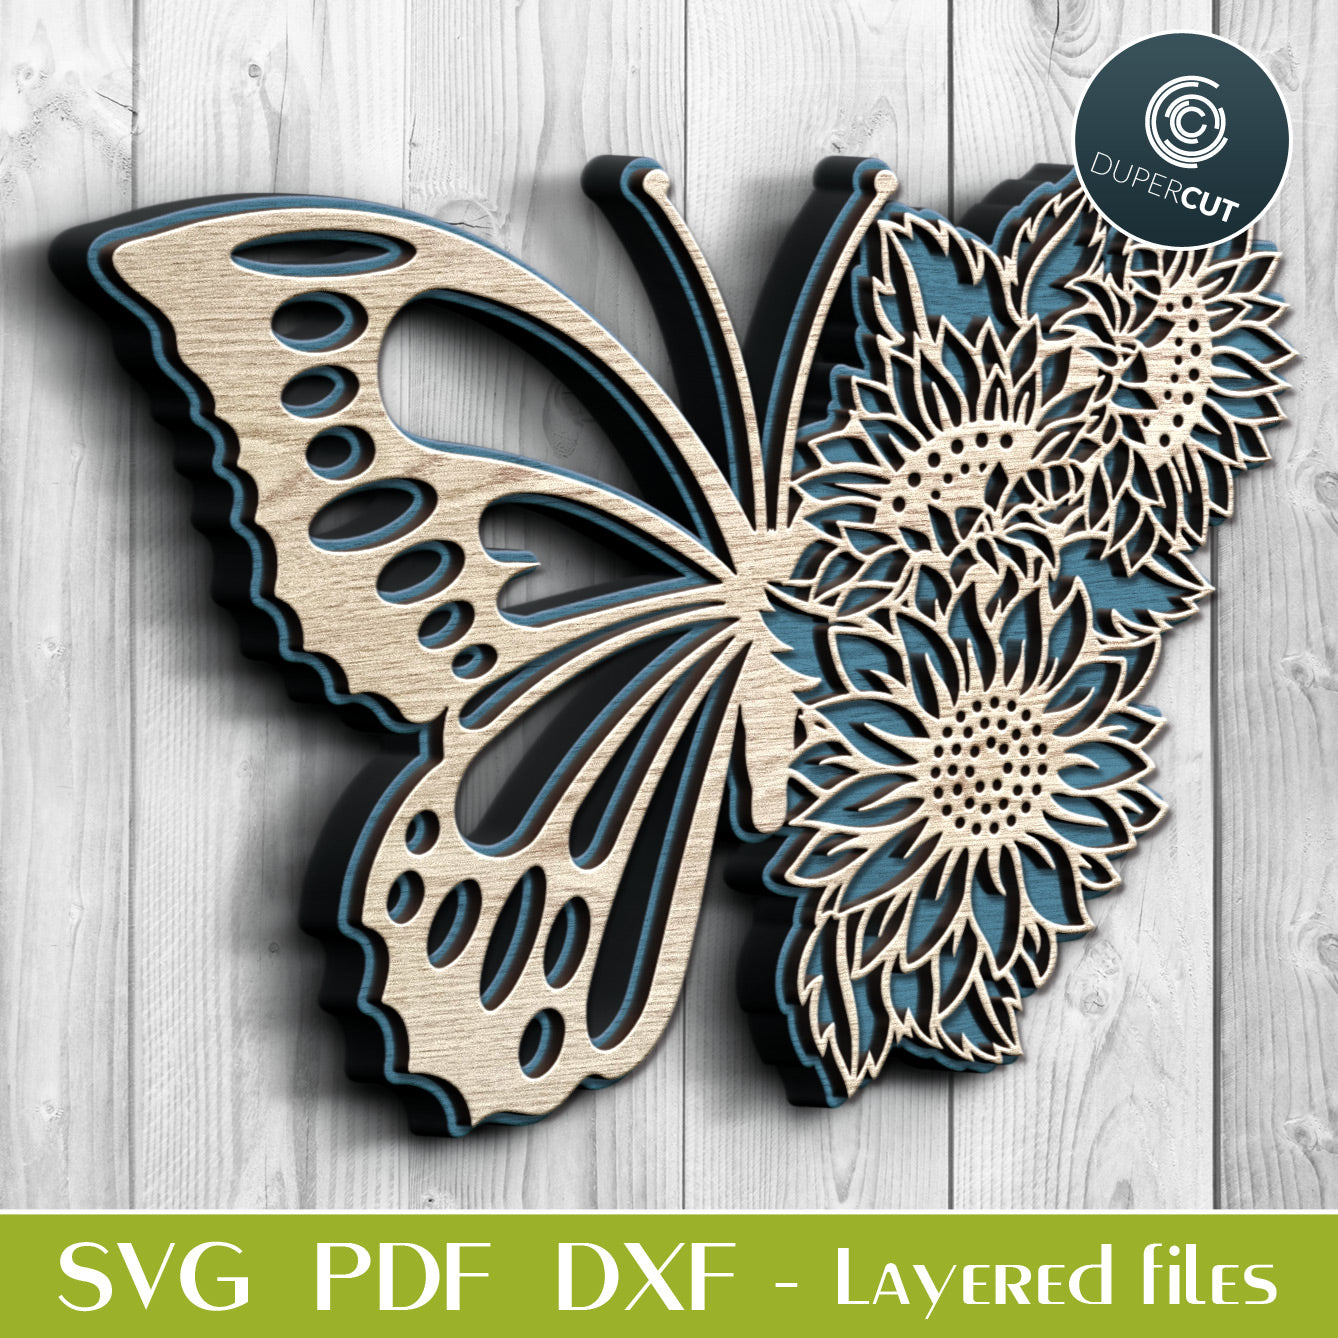 Floral morphing Half butterfly - SVG PDF DXF layered vector files for laser cutting and engraving. For use with Glowforge, Cricut, Silhouette, CNC plasma machines